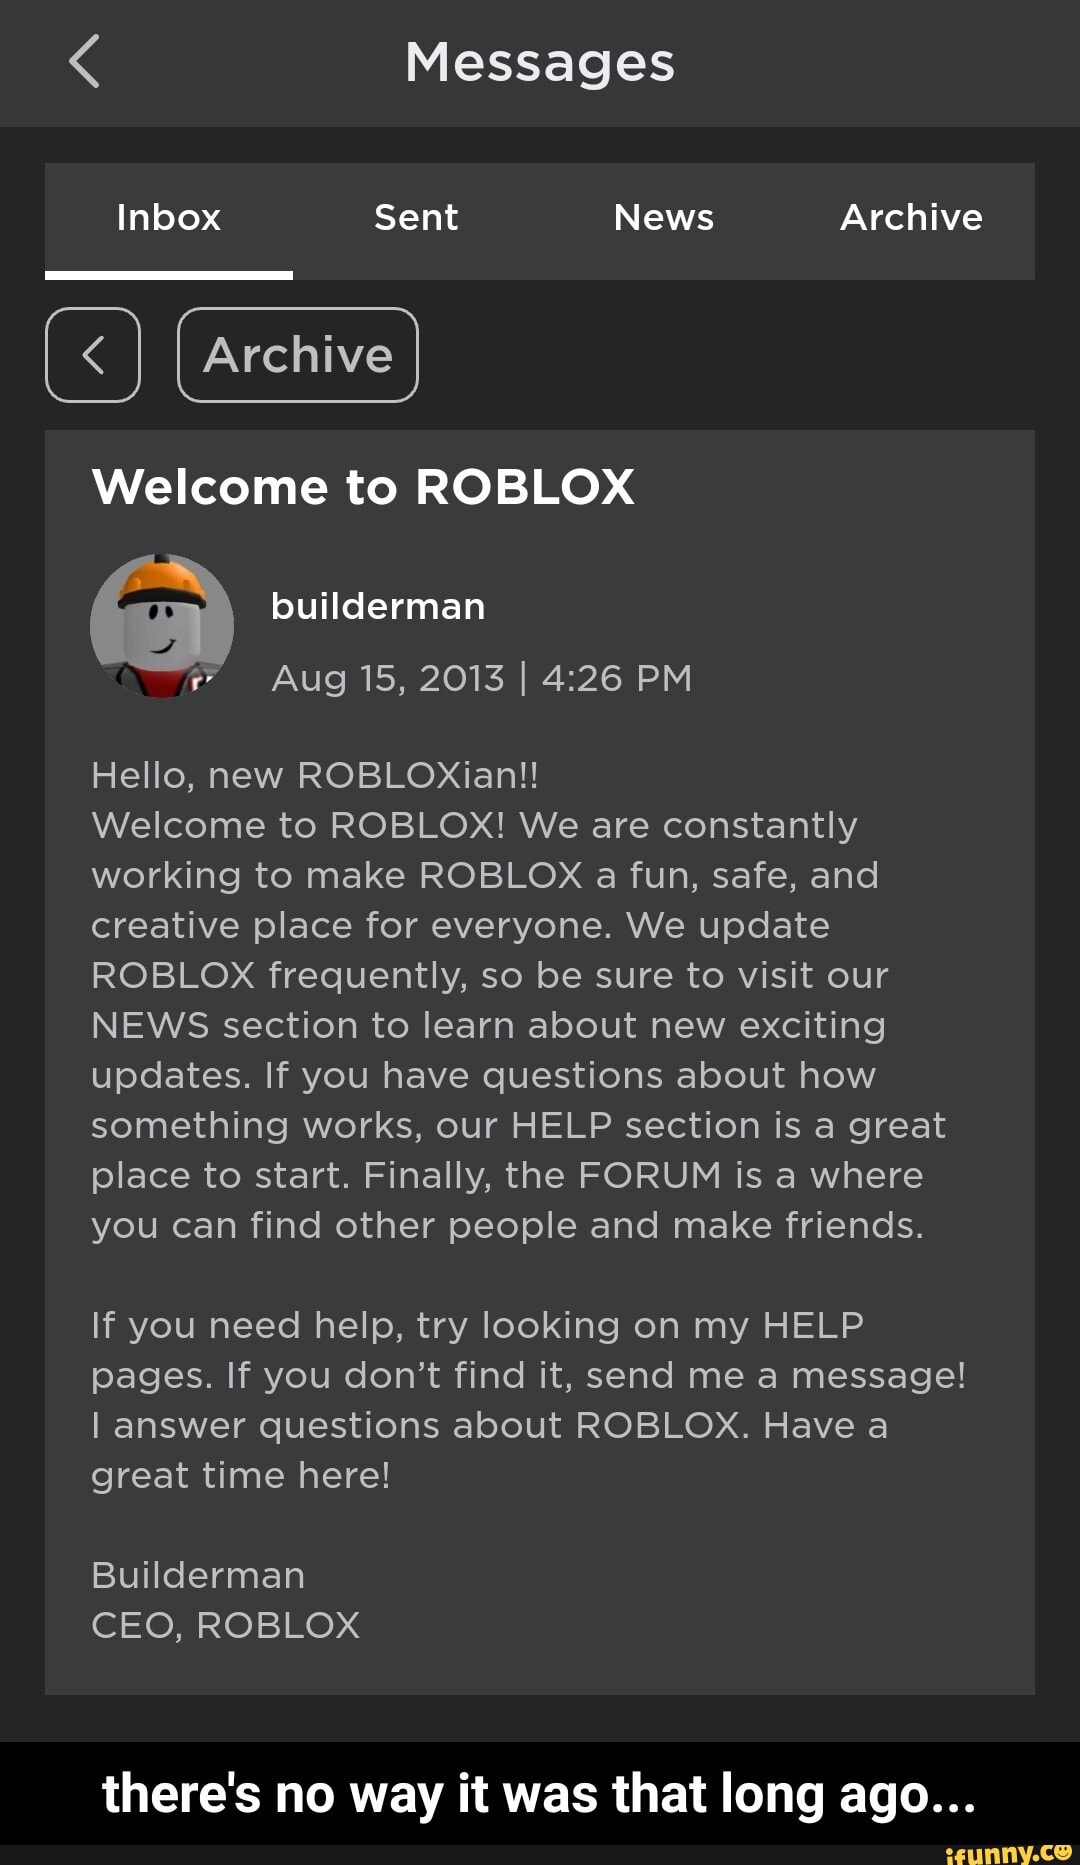 What Are The Possibilities Of Robloxian Getting Into Crossover